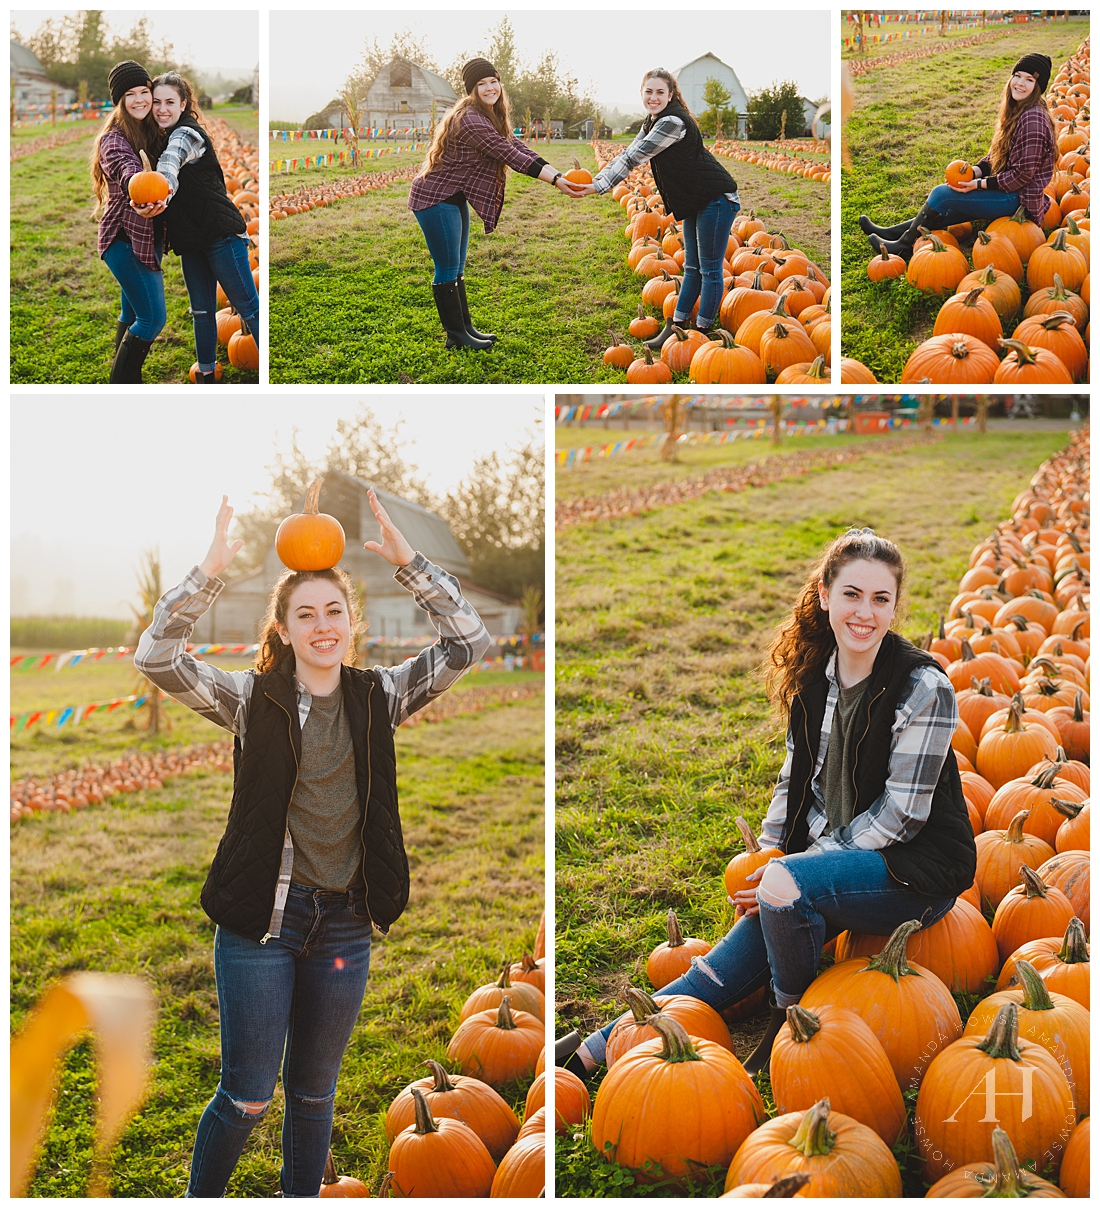 Rustic Senior Portraits with Friends | Group Portrait Sessions during COVID | How to Host a Themed Shoot for High School Seniors | Photographed by Tacoma Senior Photographer Amanda Howse